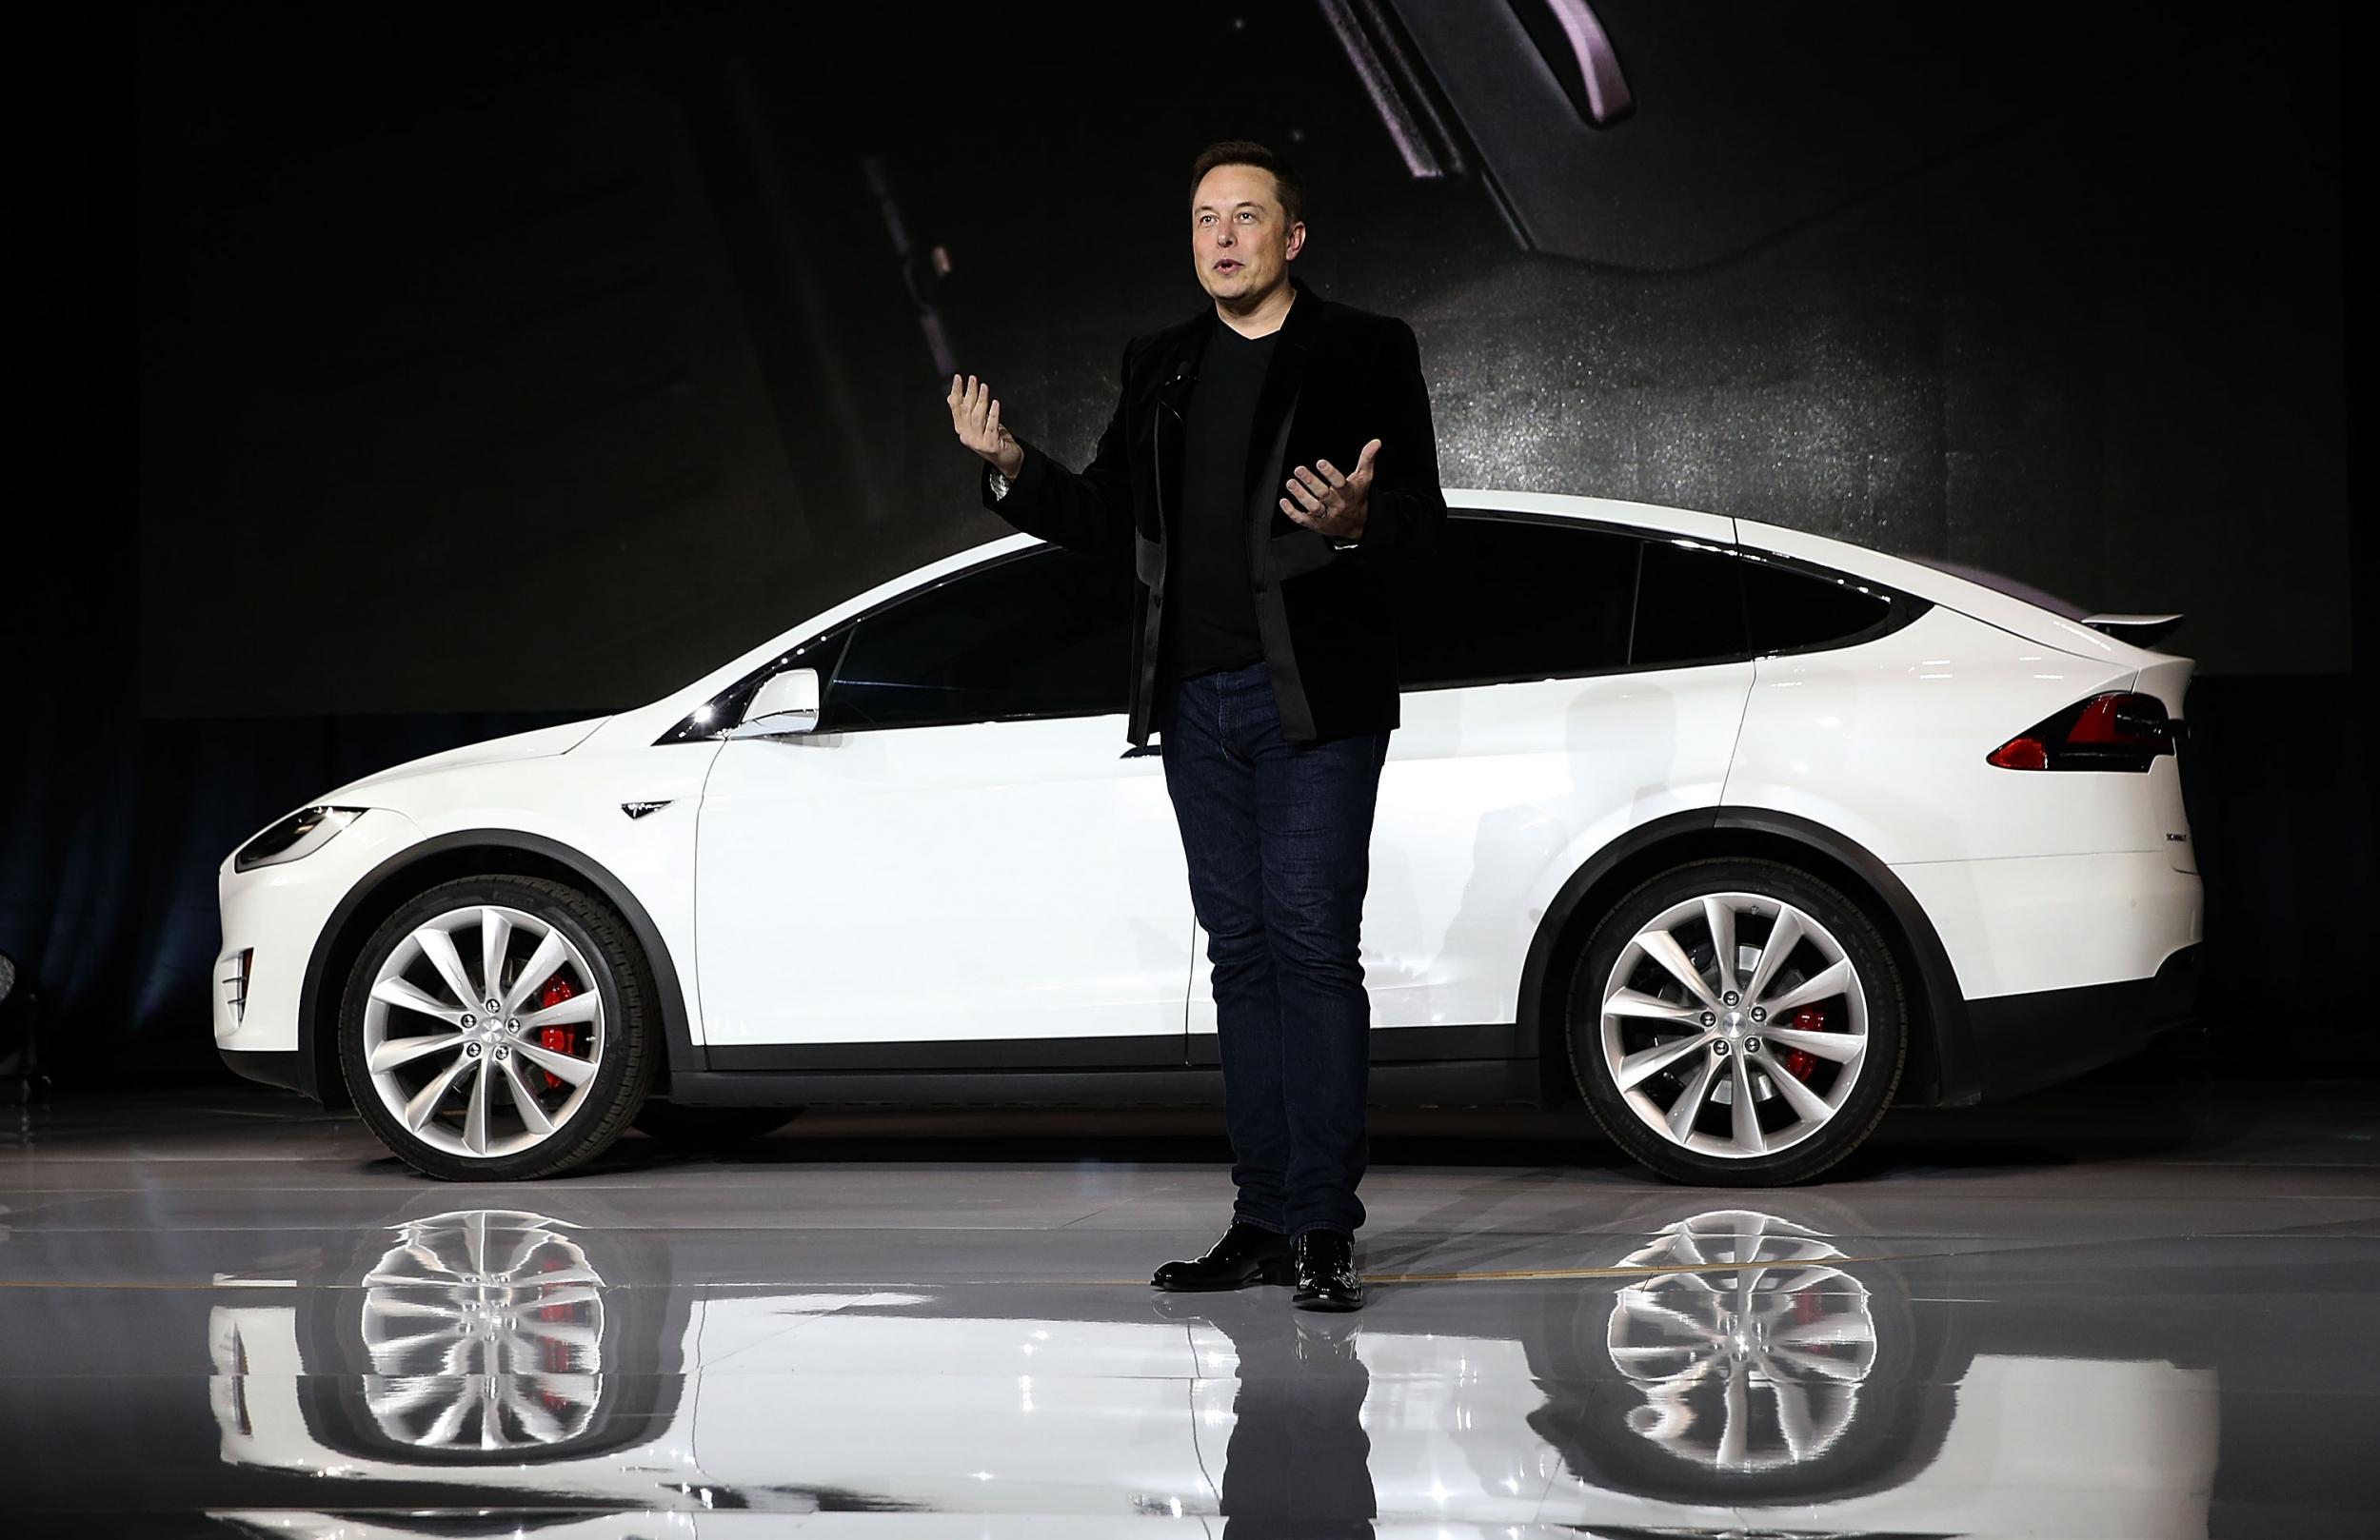 Tesla CEO Elon Musk speaks at the launch of the Tesla Model X SUV